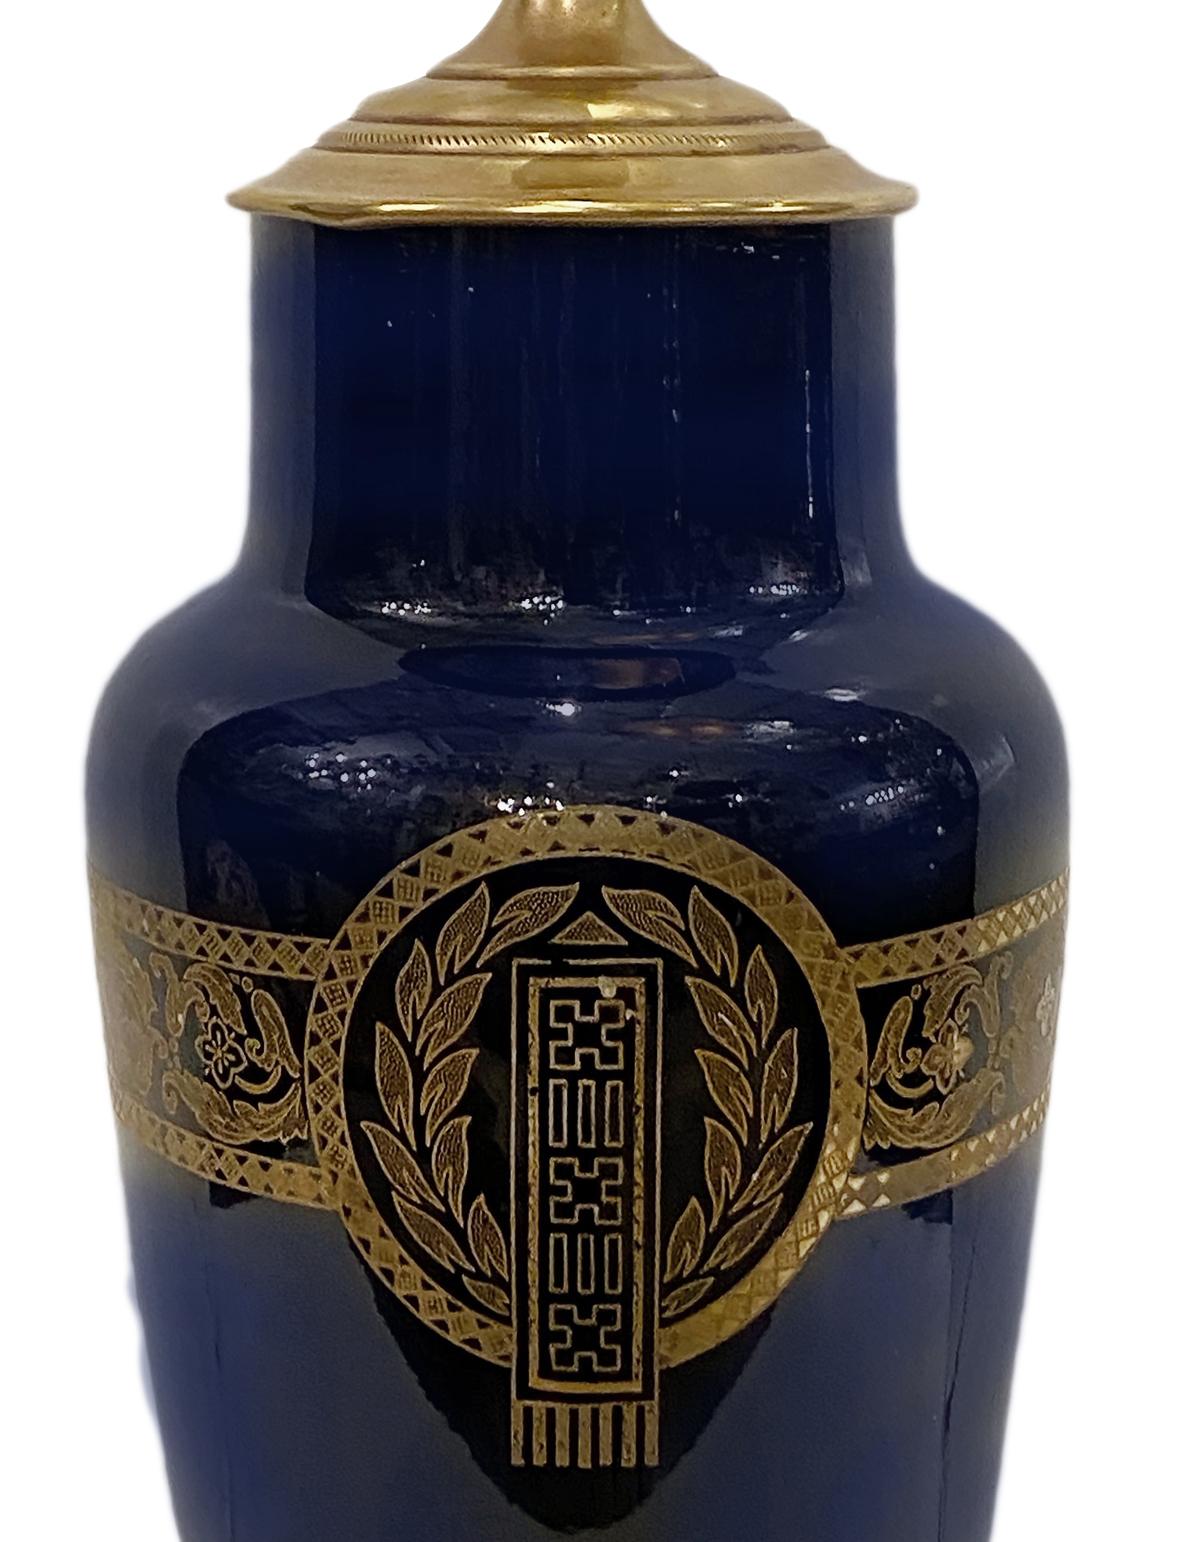 A circa 1900's French cobalt blue porcelain table lamp with gold painted detailing and bronze and pewter base.

Measurements:
Height of body: 13.5